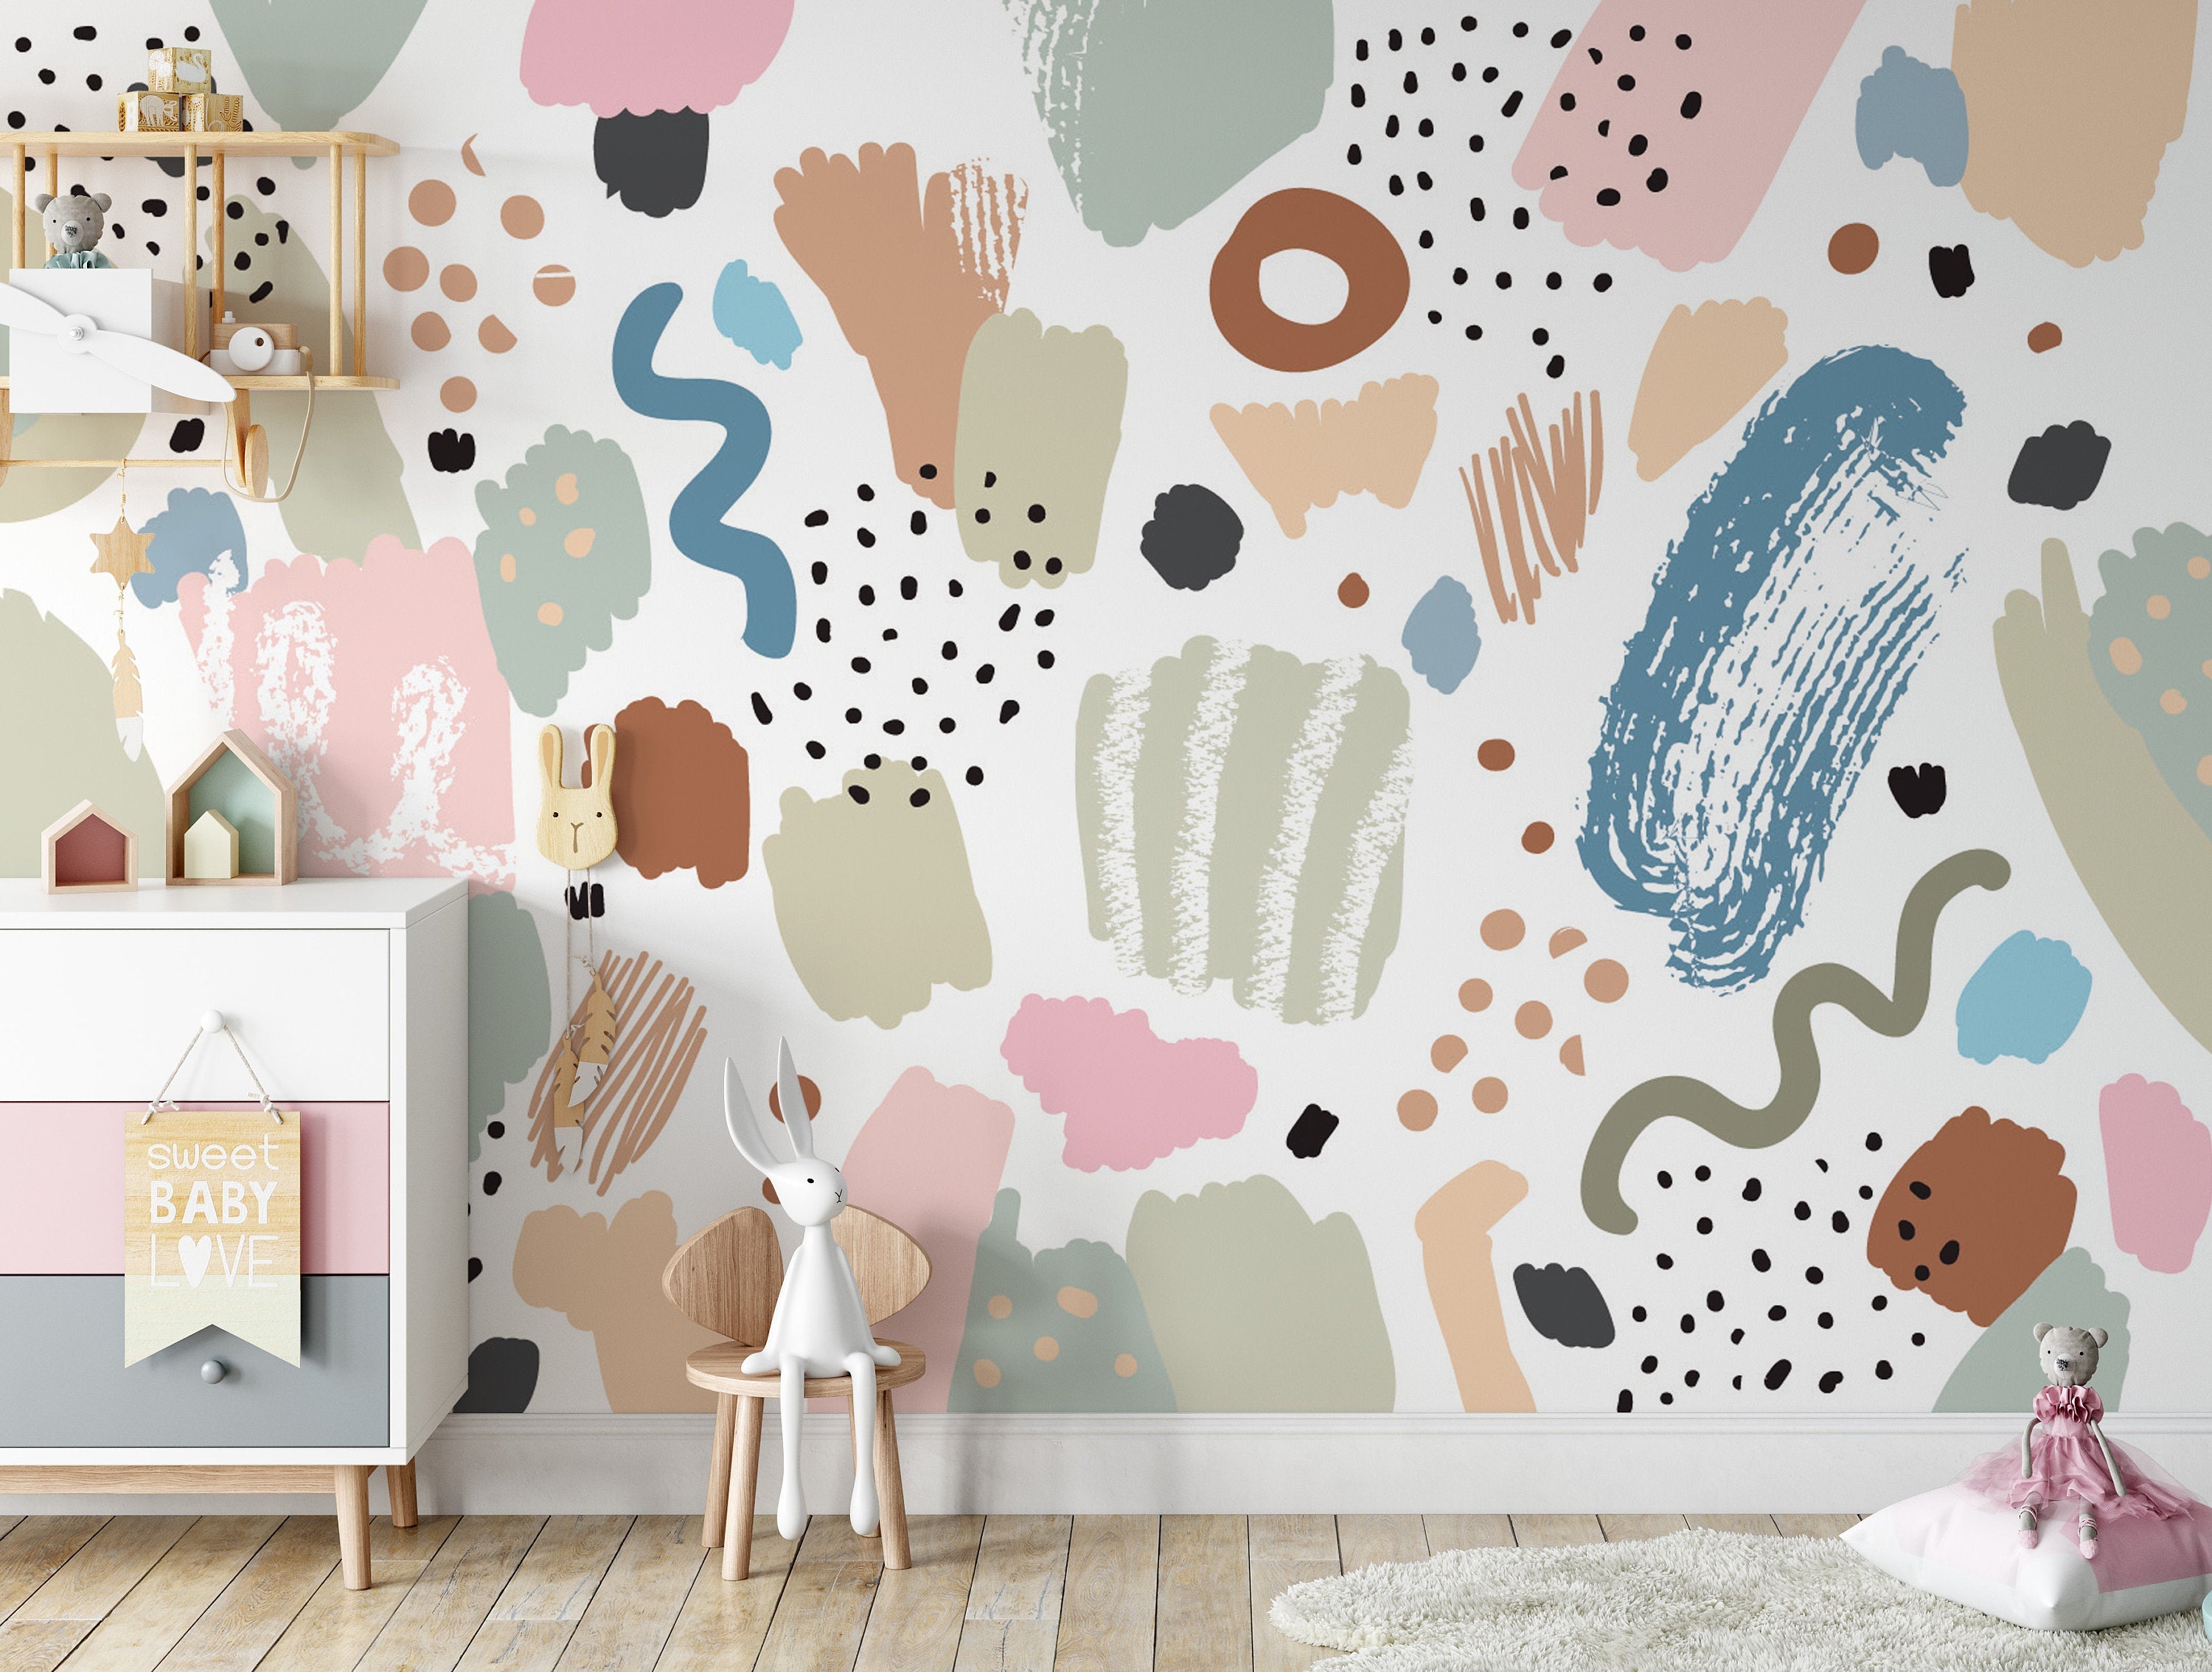 Colorful Brush Marker Pencil Stroke Pattern Abstract Wallpaper Self Adhesive Peel and Stick Wall Sticker House Design Removable